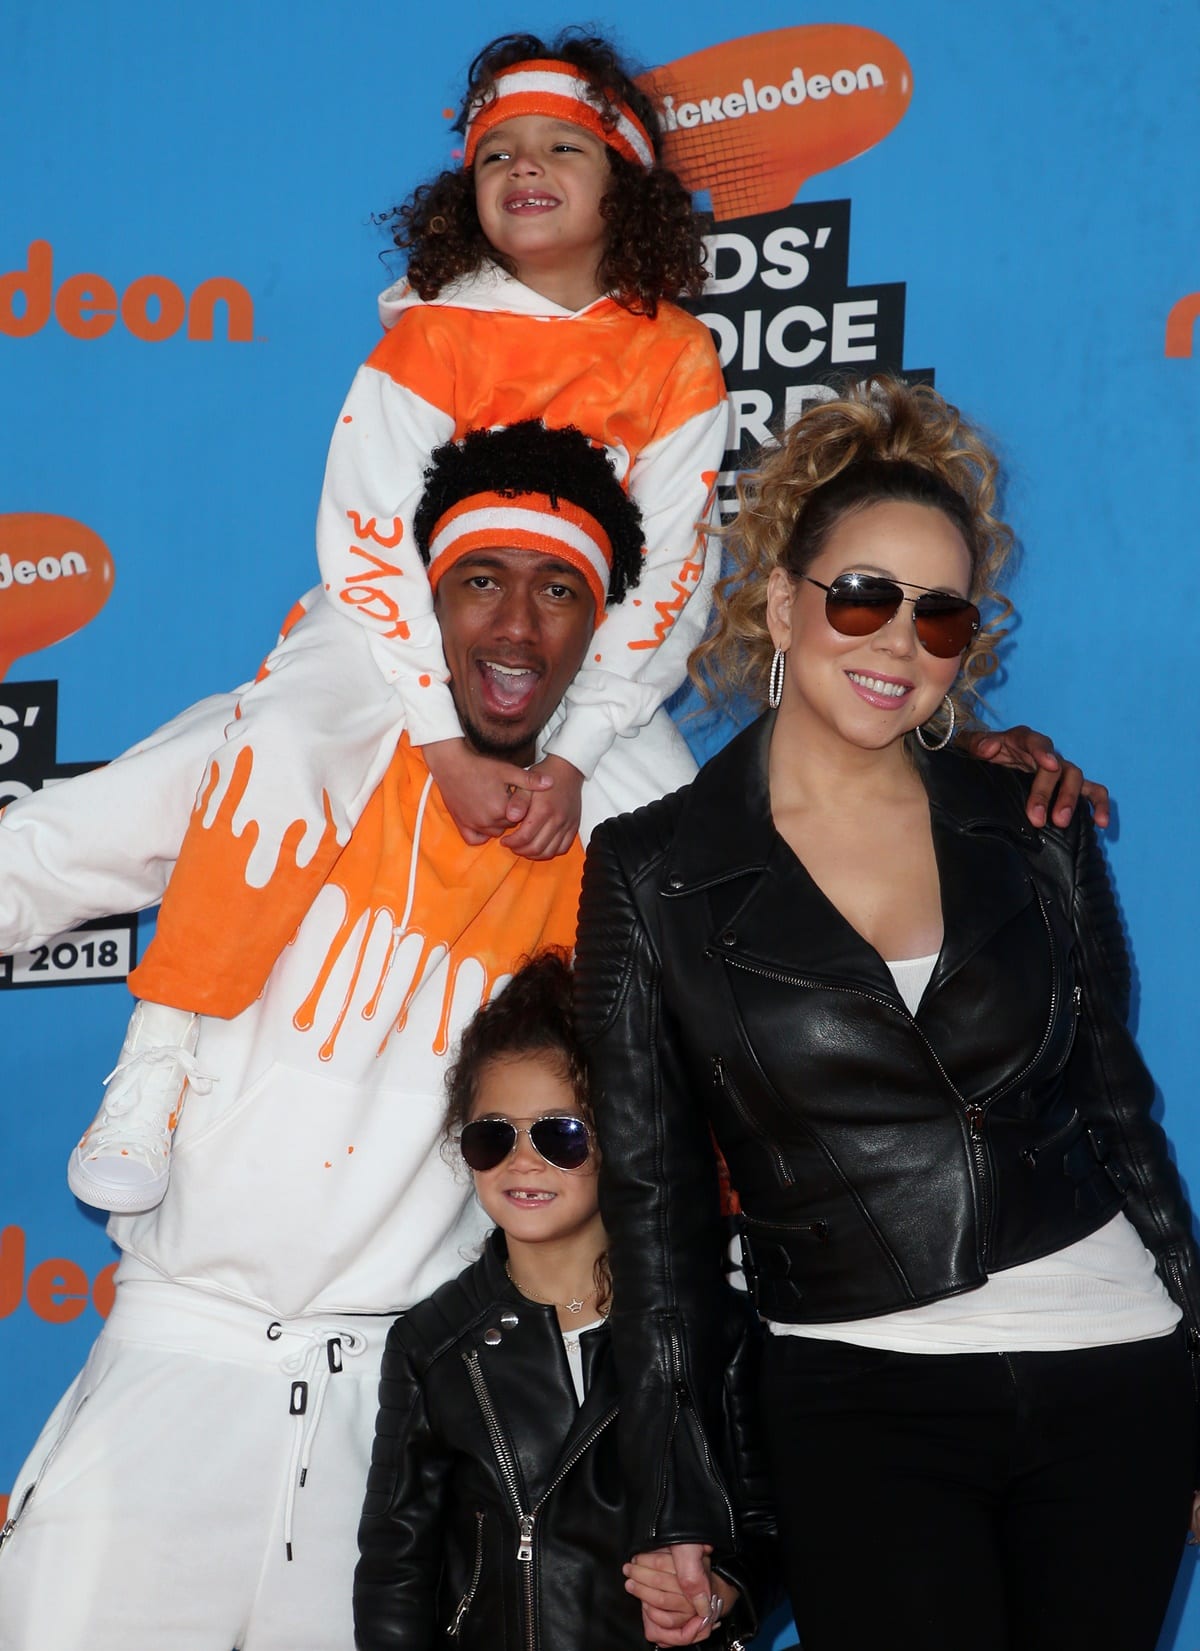 Mariah Carey and Nick Cannon at the 2018 Kids' Choice Awards with their twins, Moroccan and Monroe, who sported matching outfits to their parents